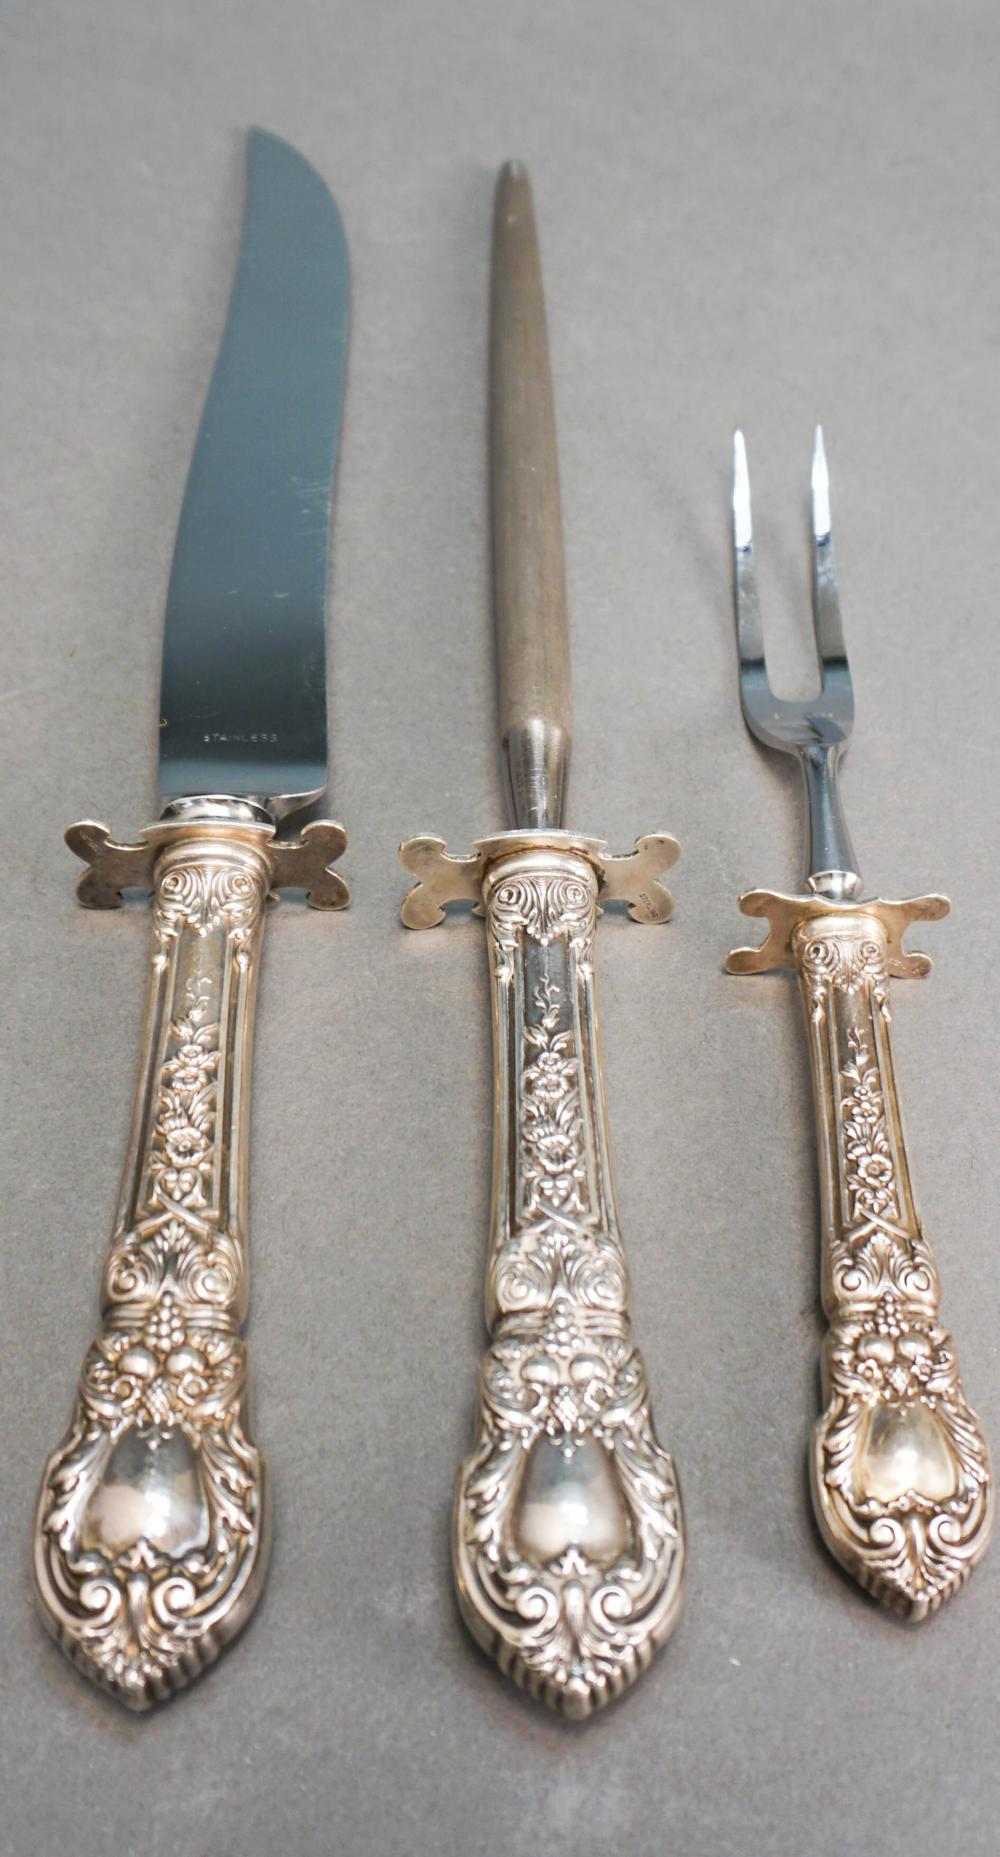 STERLING SILVER HANDLED THREE-PIECE